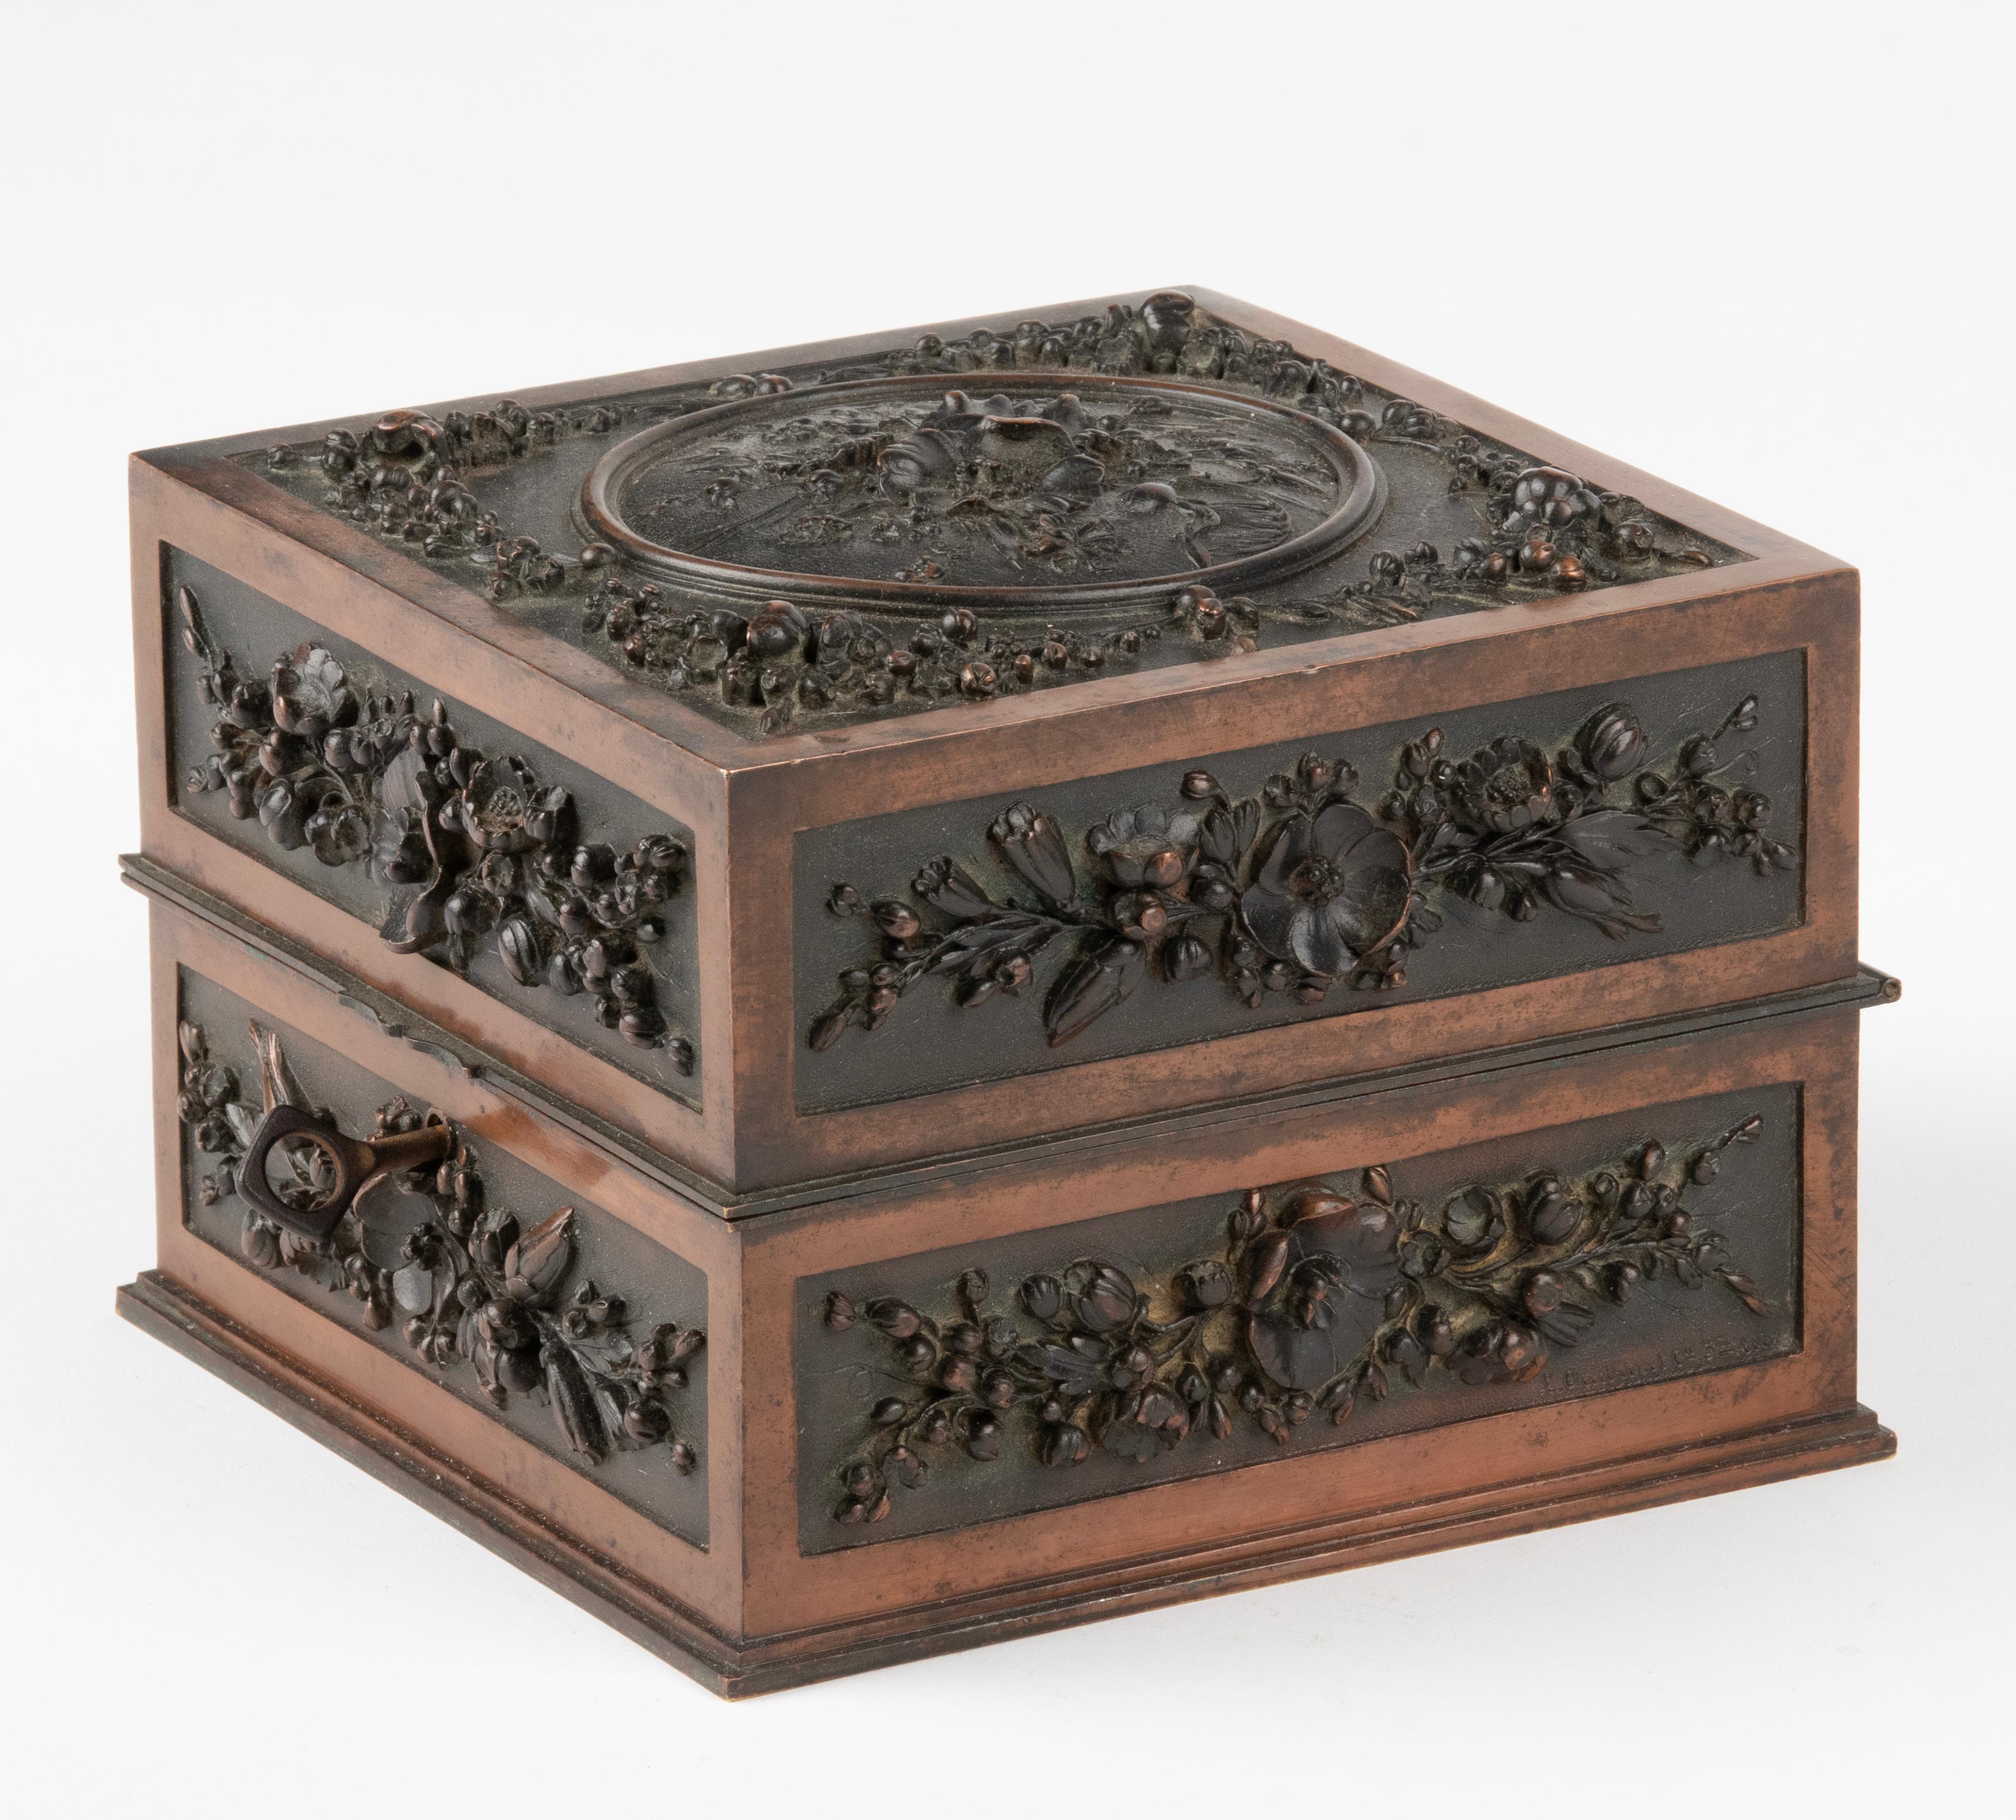 Late 19th Century Black Forest Bronze Decorative Box by Leopold Oudry & Cie. For Sale 8